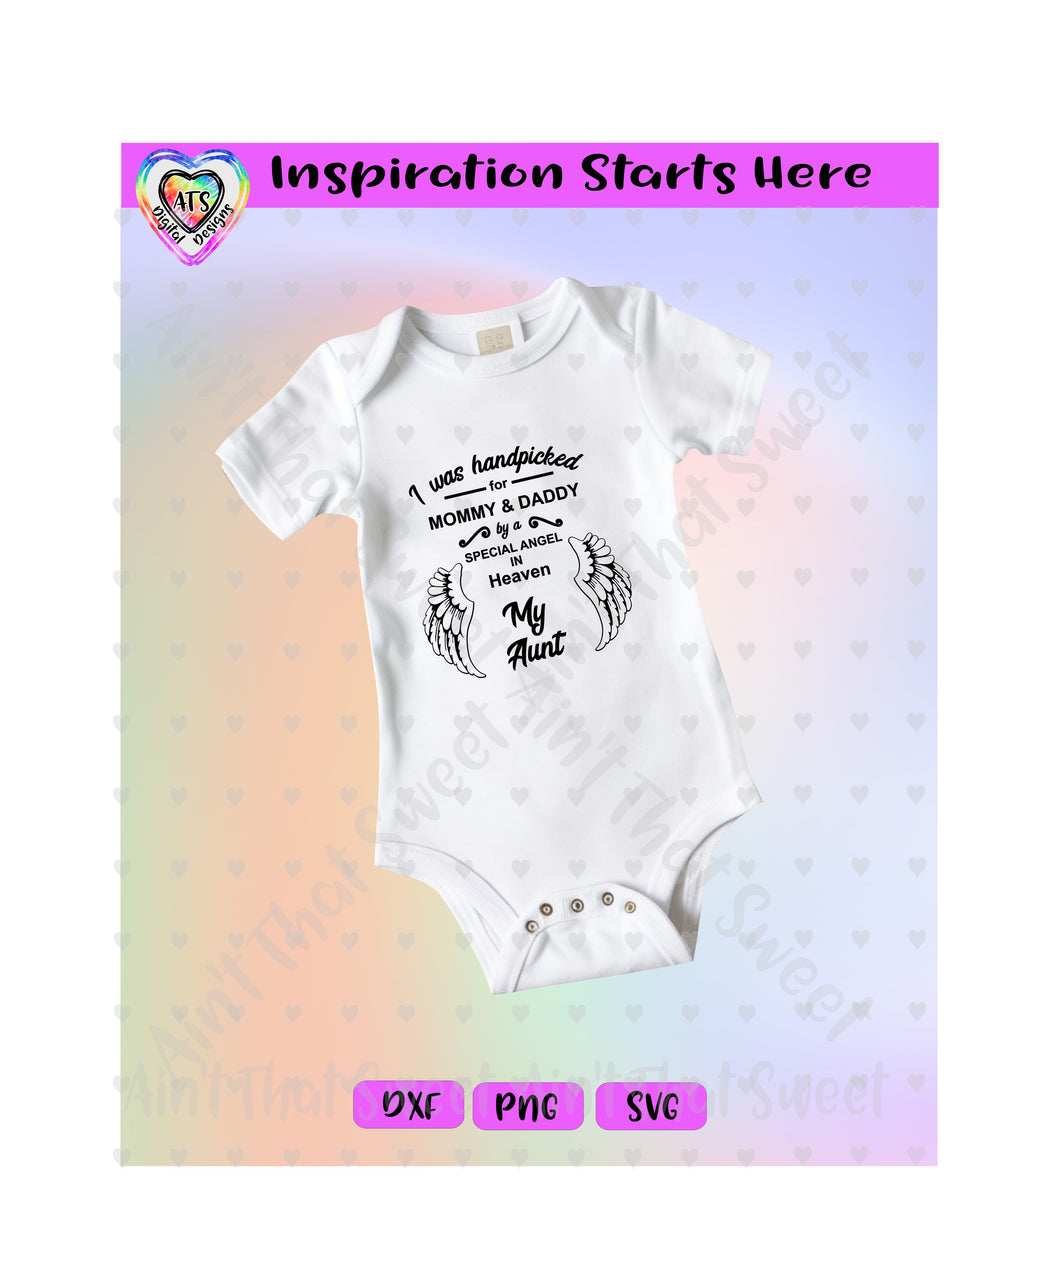 I Was Handpicked For Mommy & Daddy By A Special Angel - My Aunt | Wings - Transparent PNG, SVG, DXF  - Silhouette, Cricut, Scan N Cut